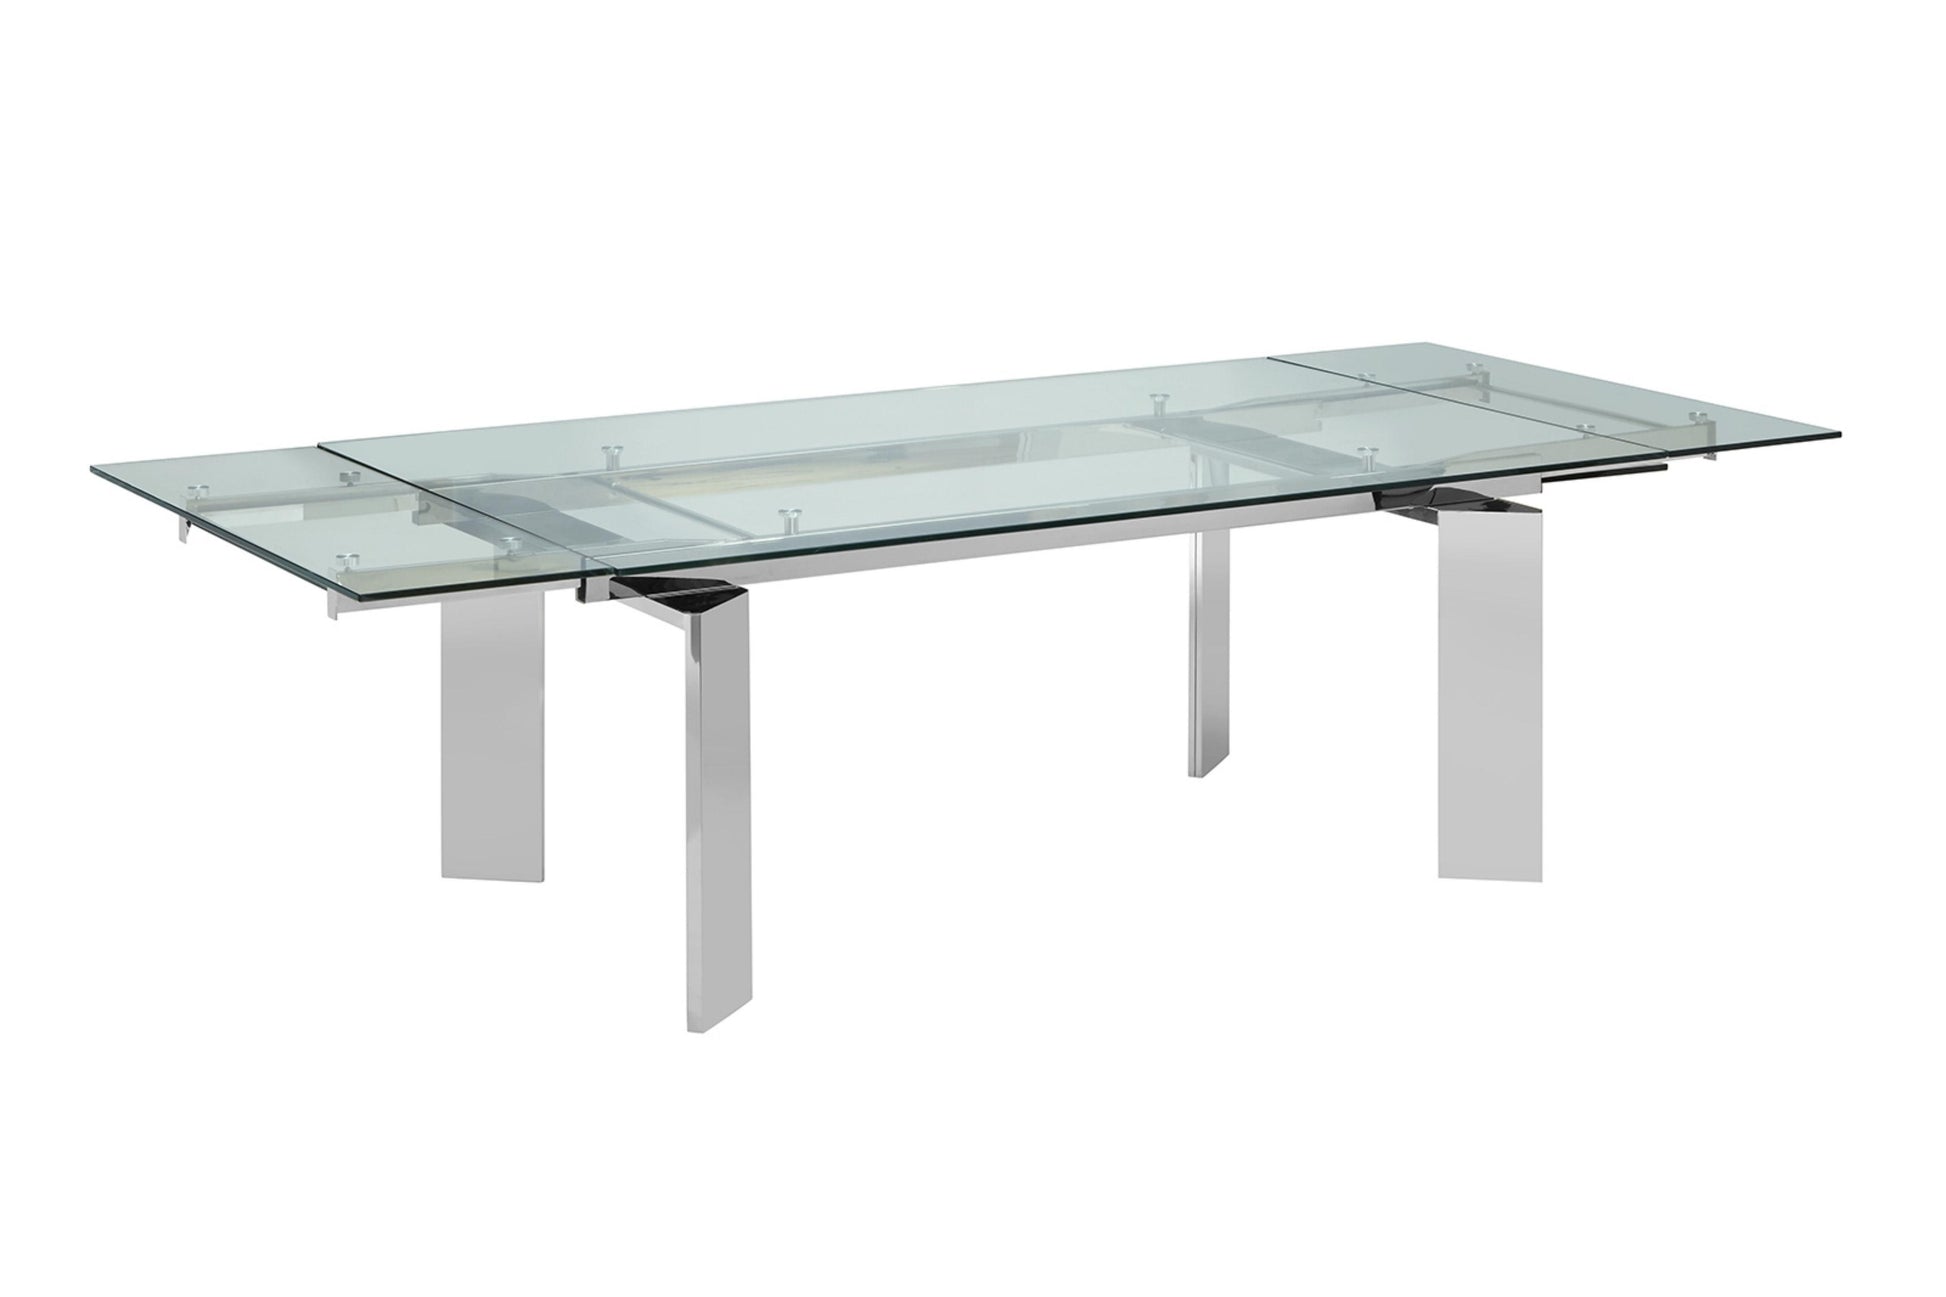  dining table in clear glass 